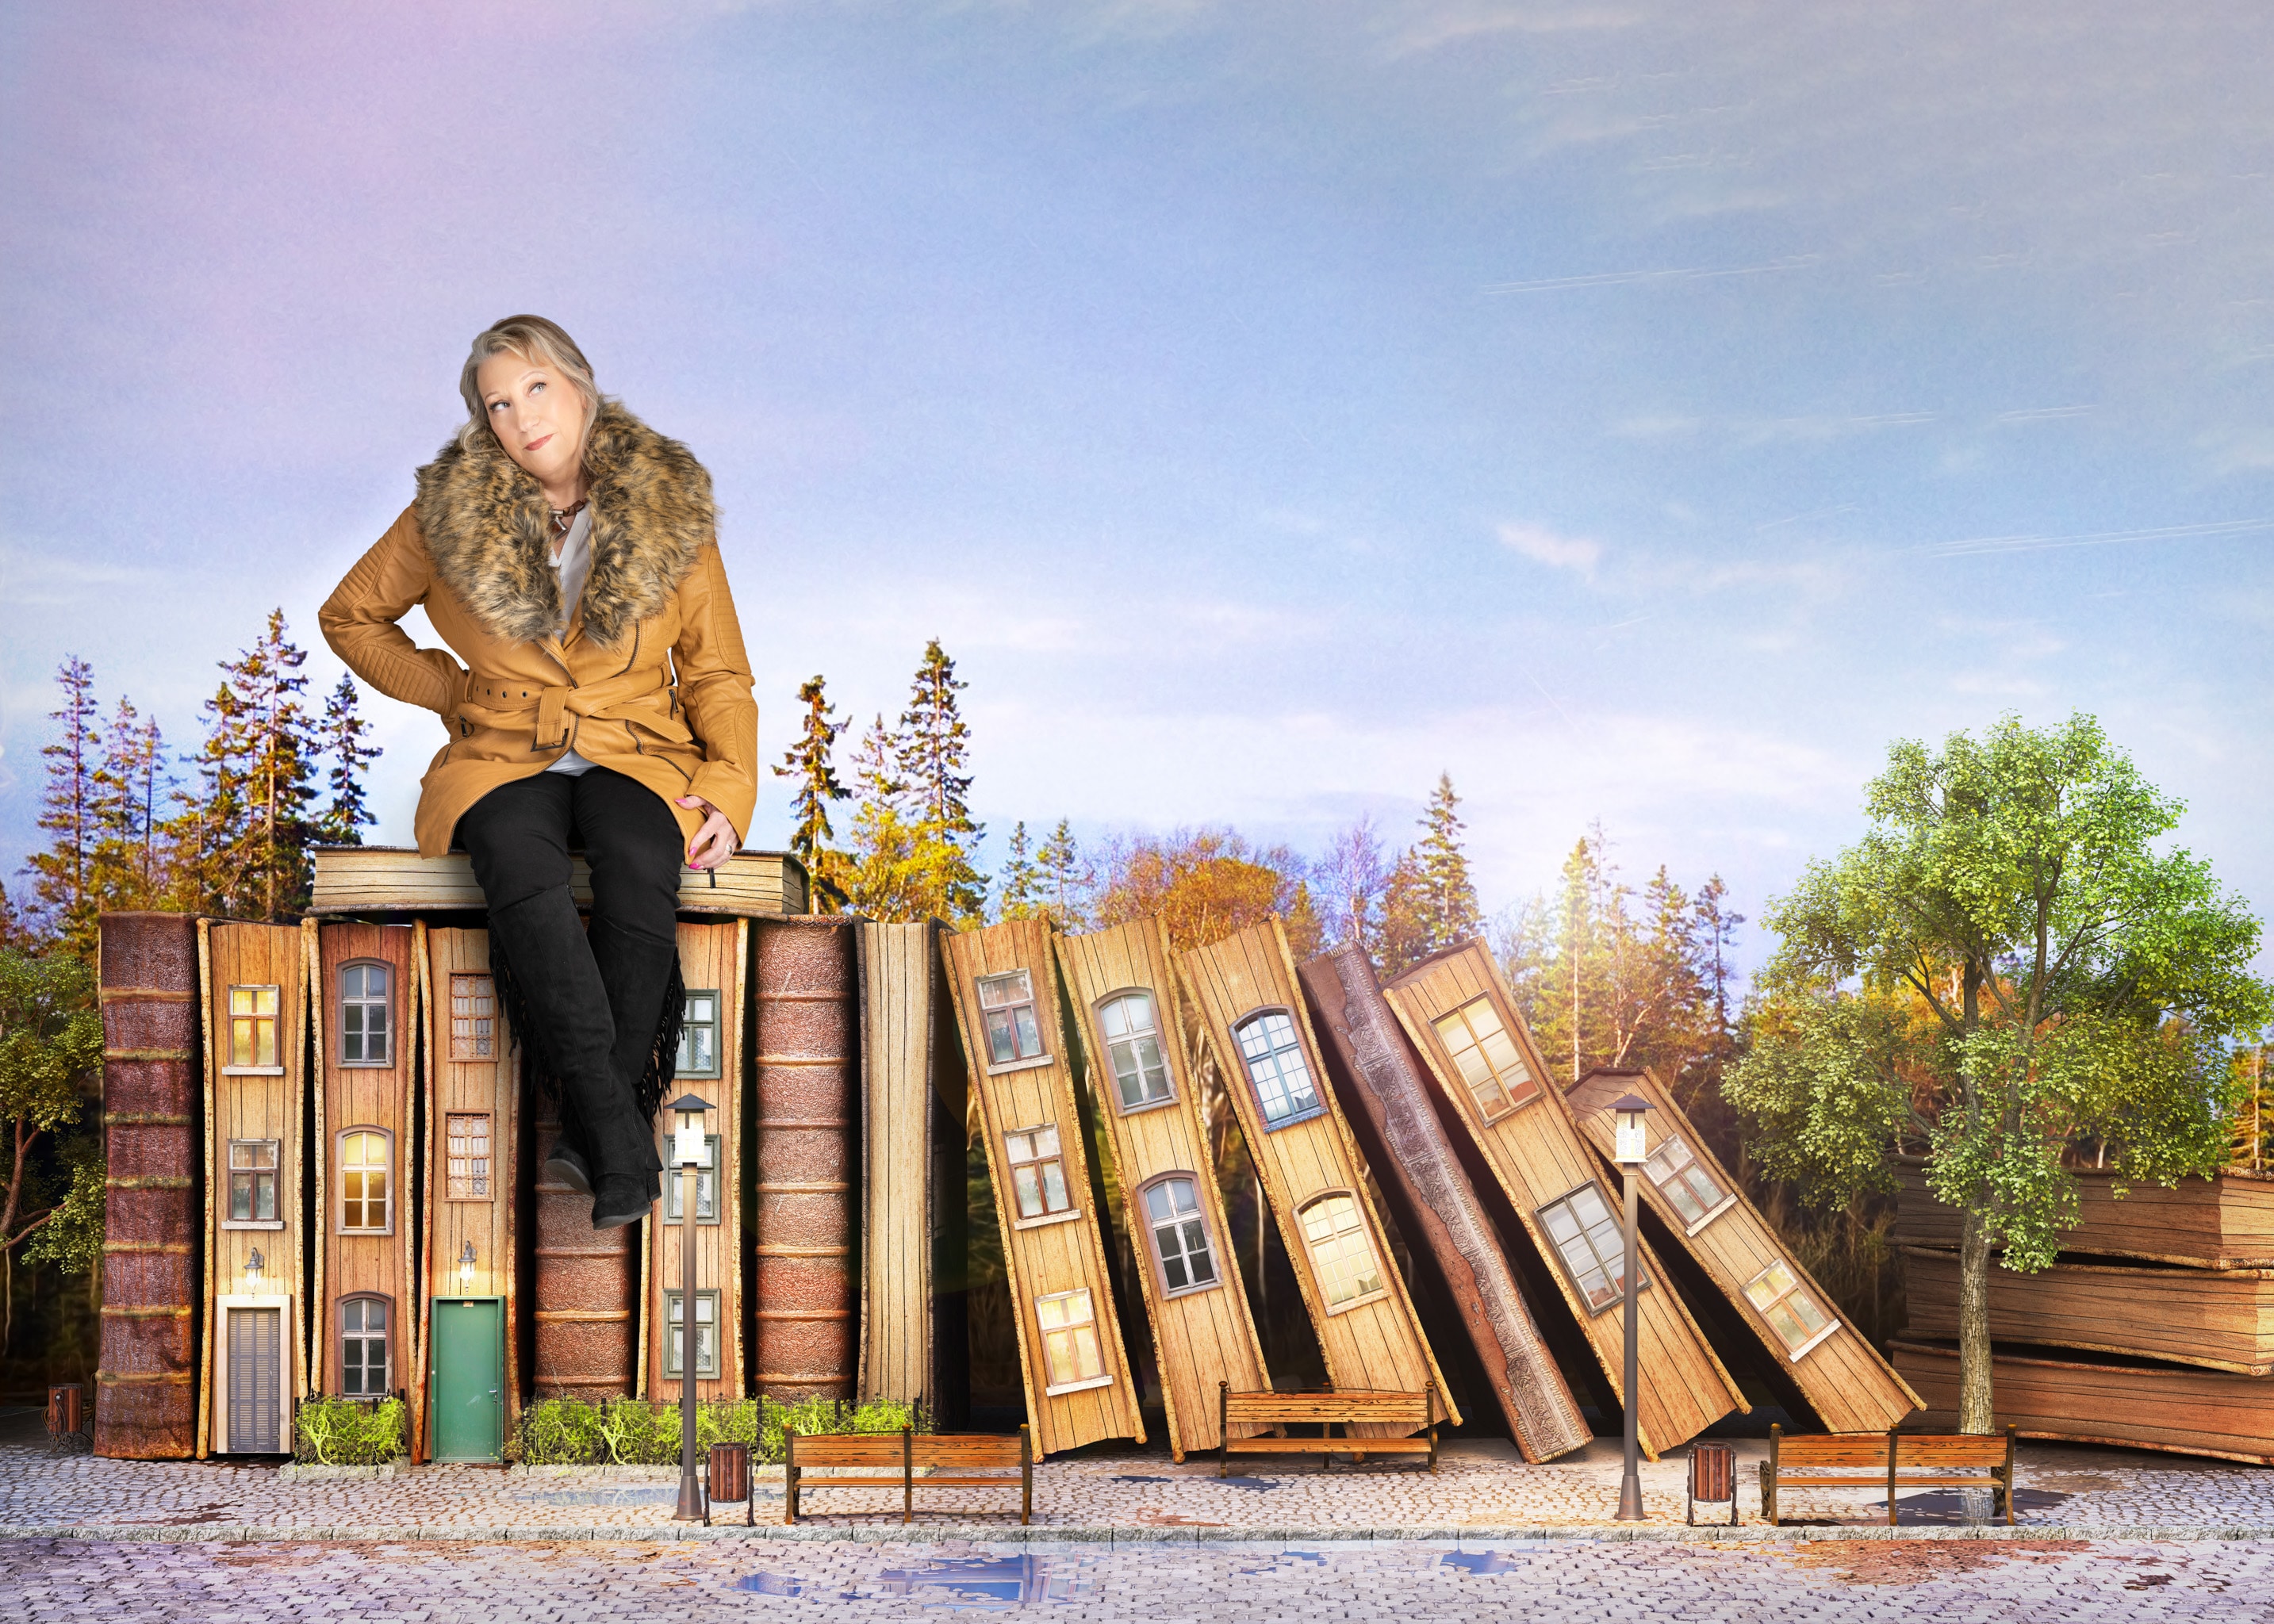 Fantasy image of woman sitting on street scene made of old books